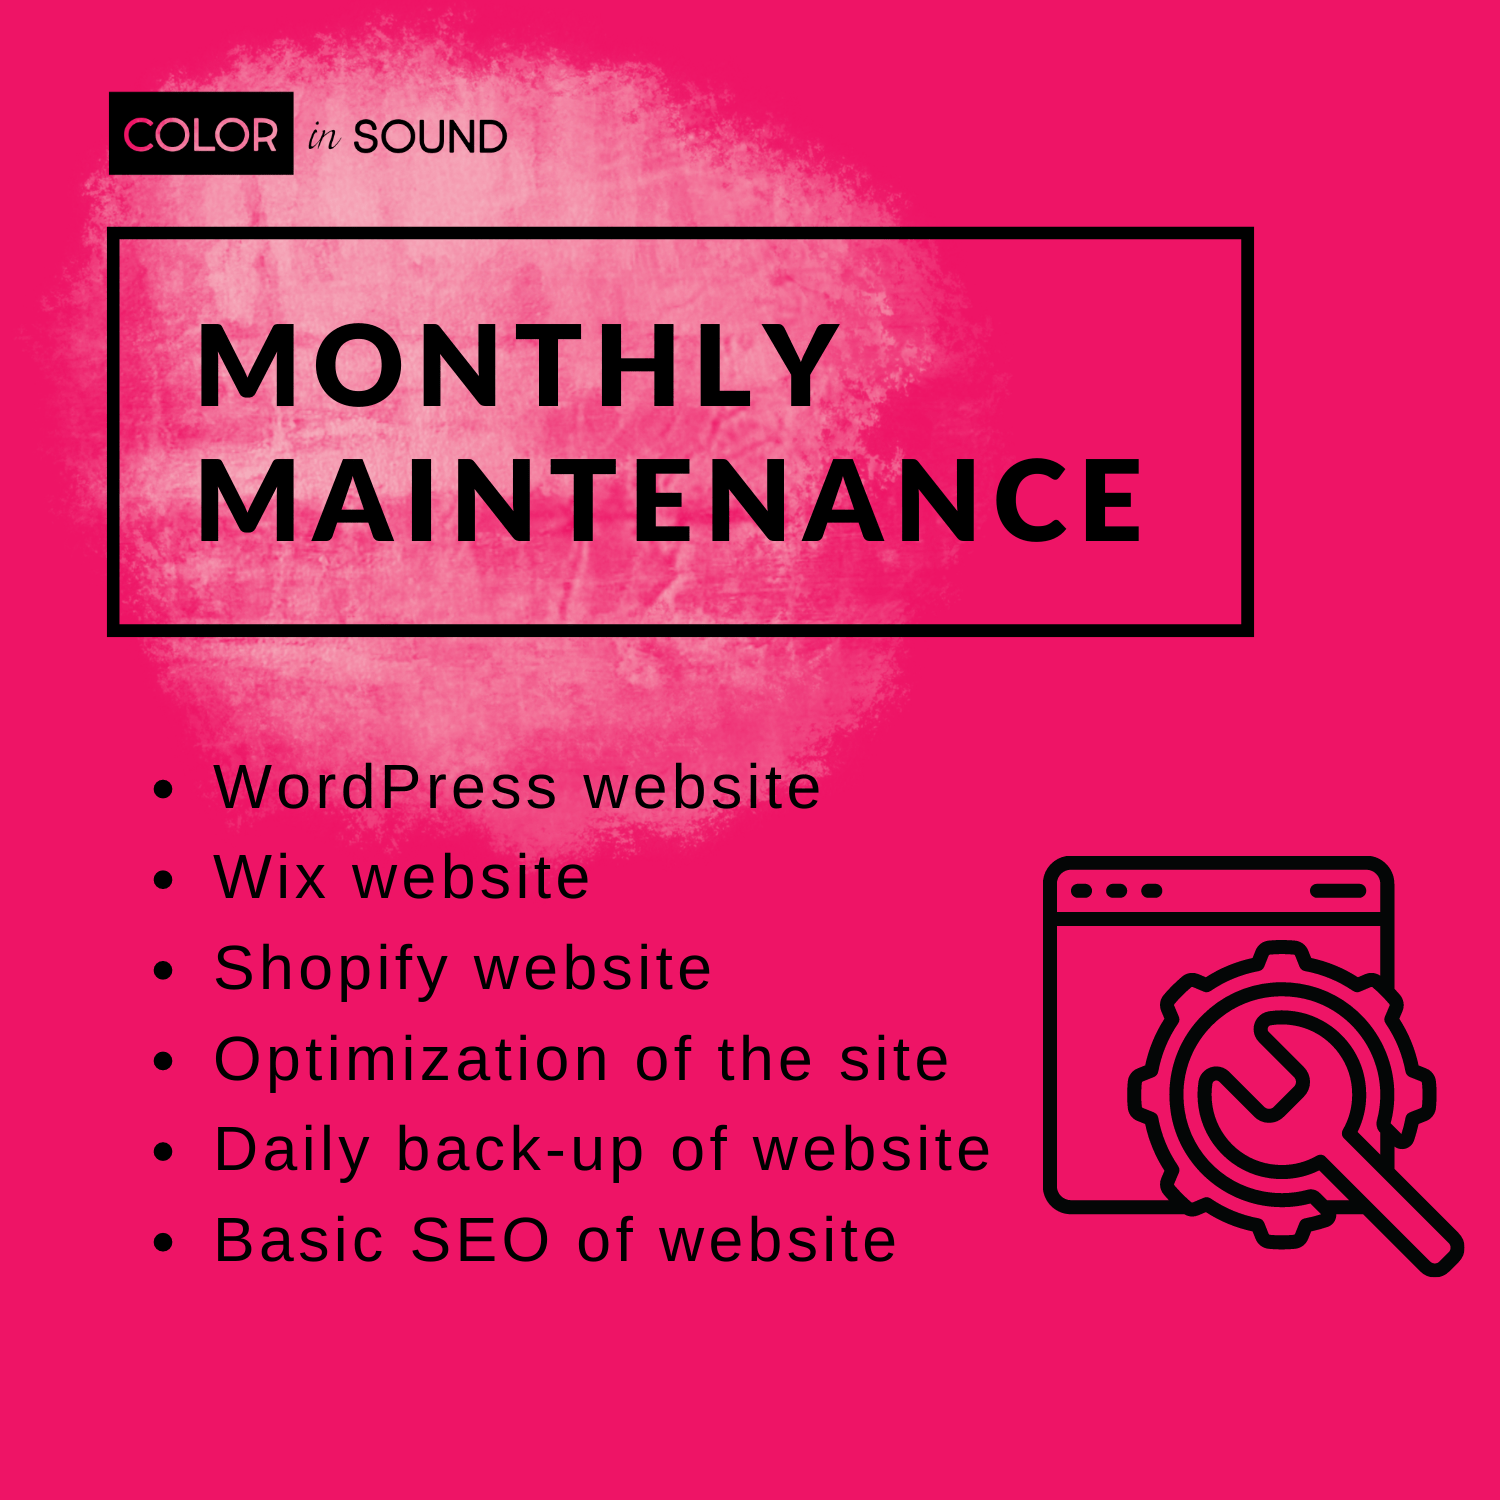 Monthly maintain your wordpress, Wix, Shopify website